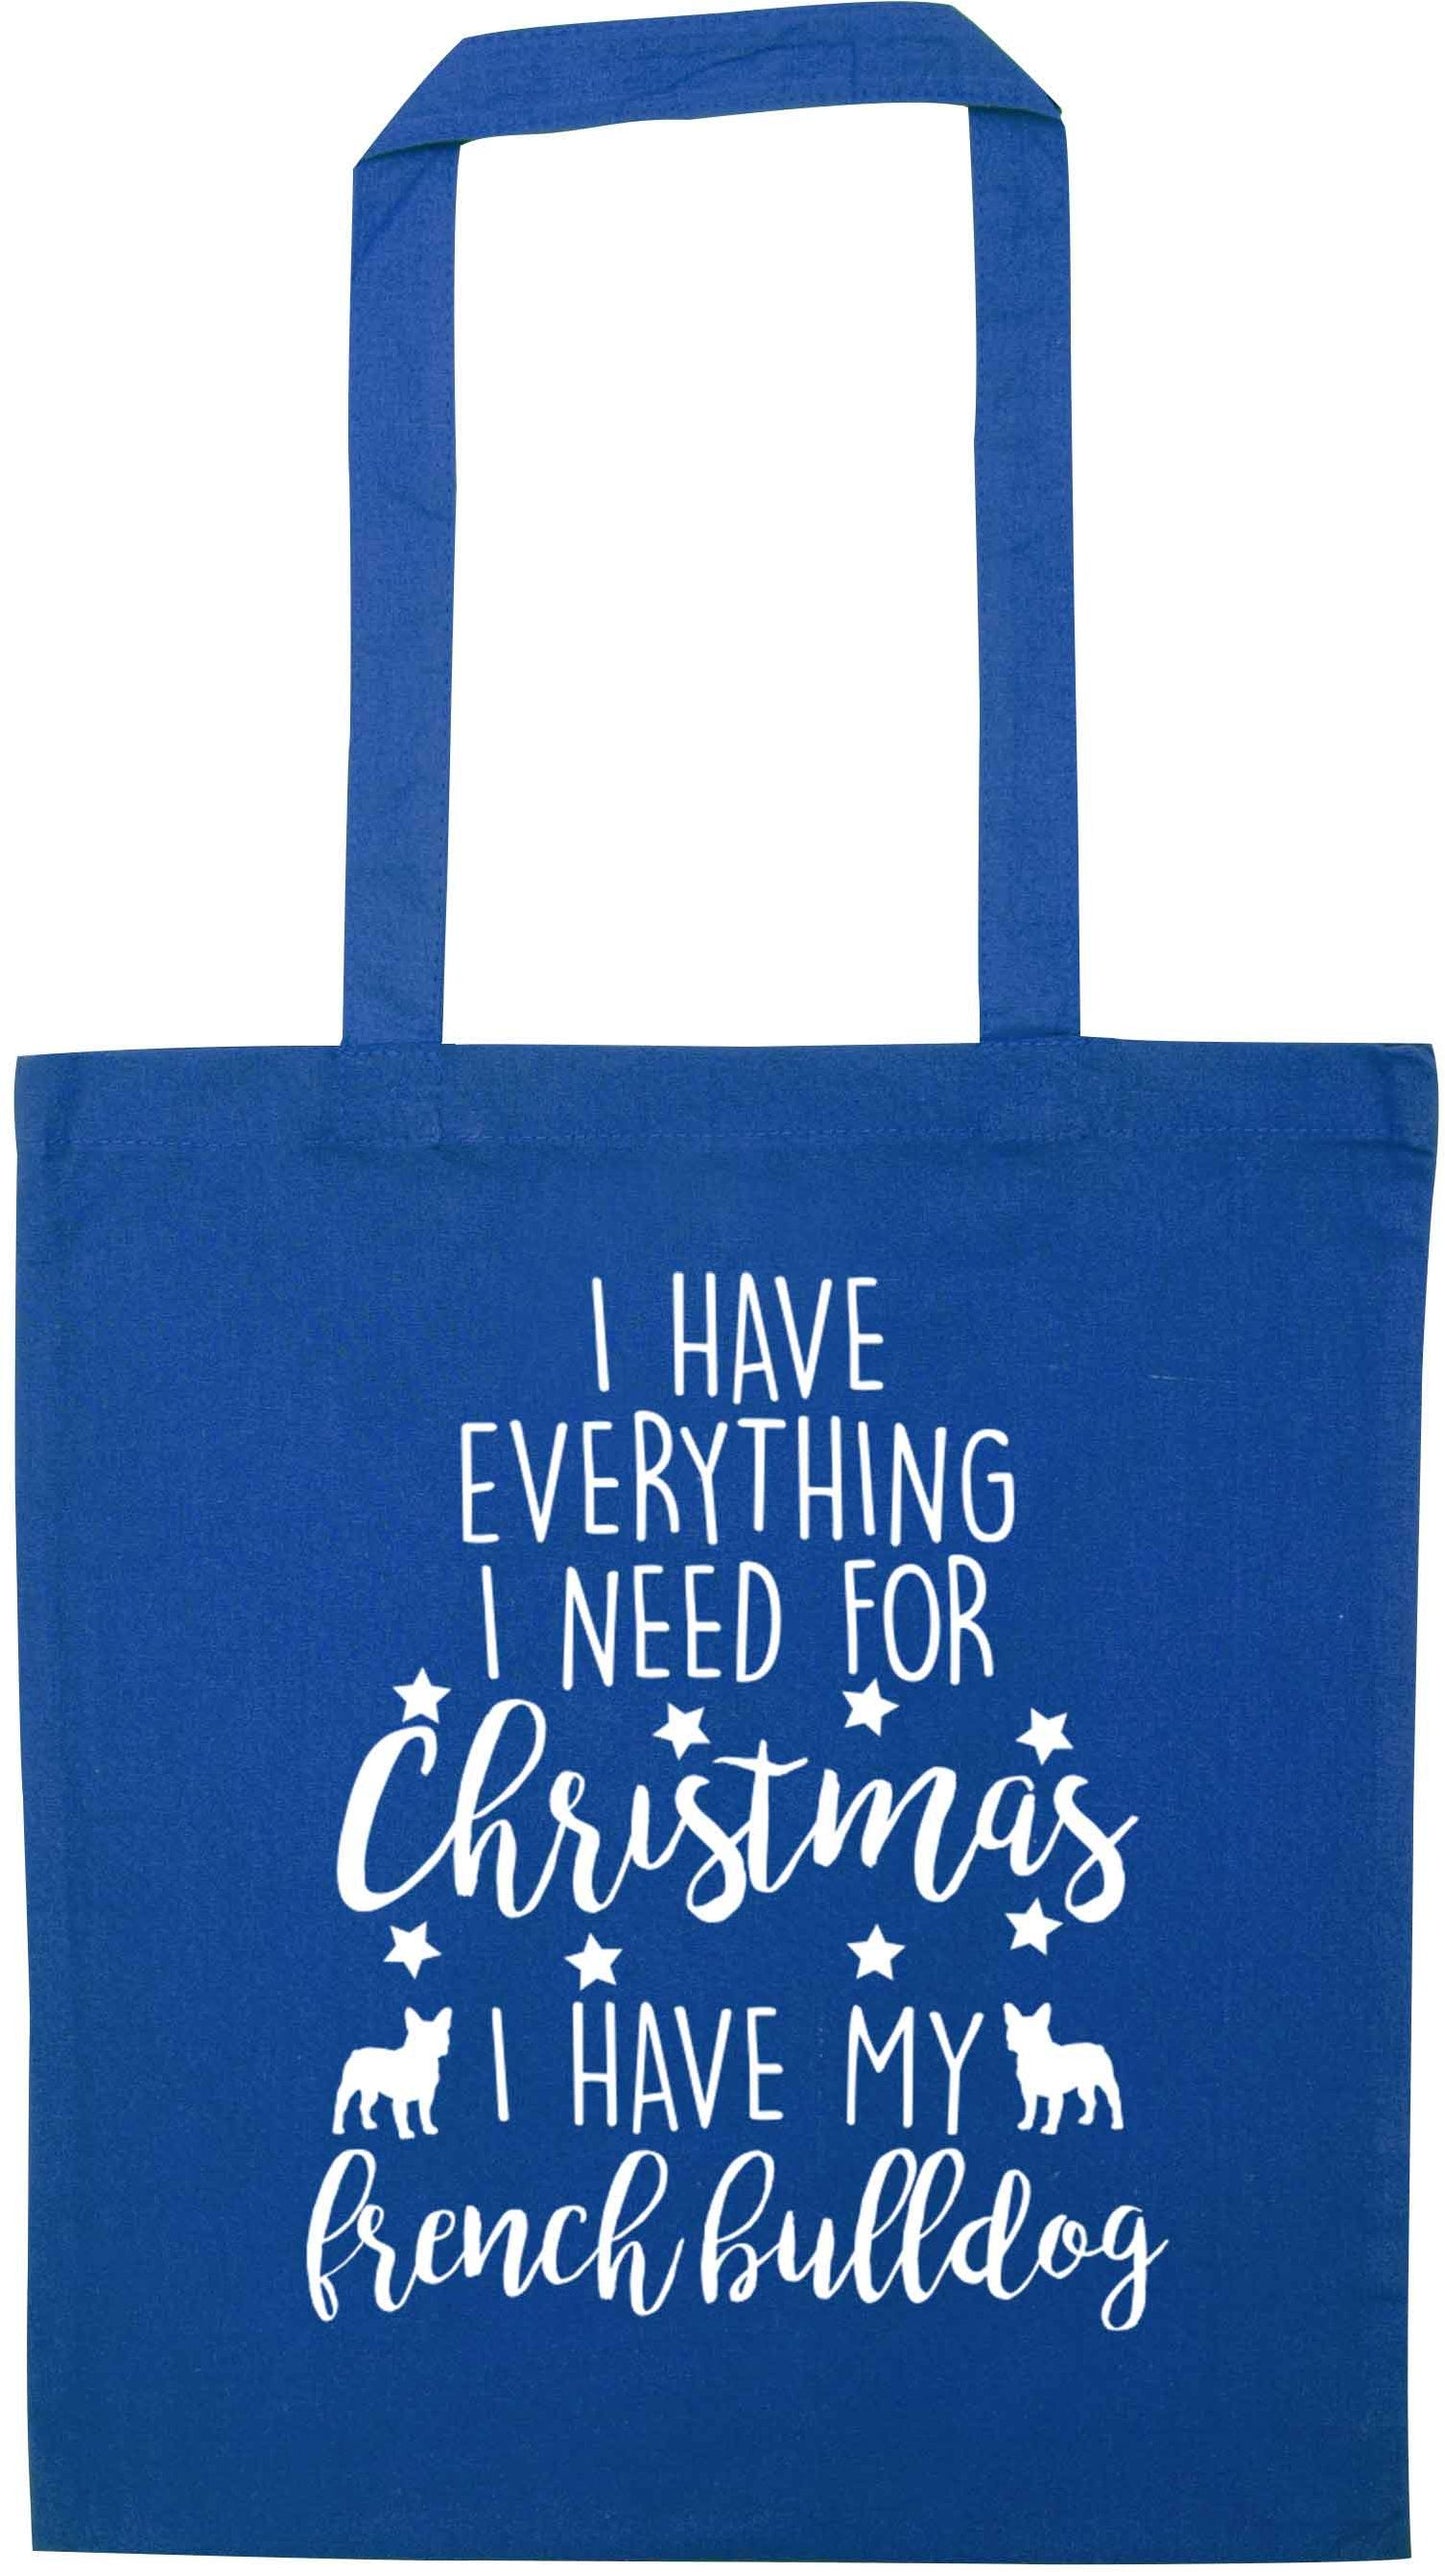 I have everything I need for Christmas I have my french bulldog blue tote bag